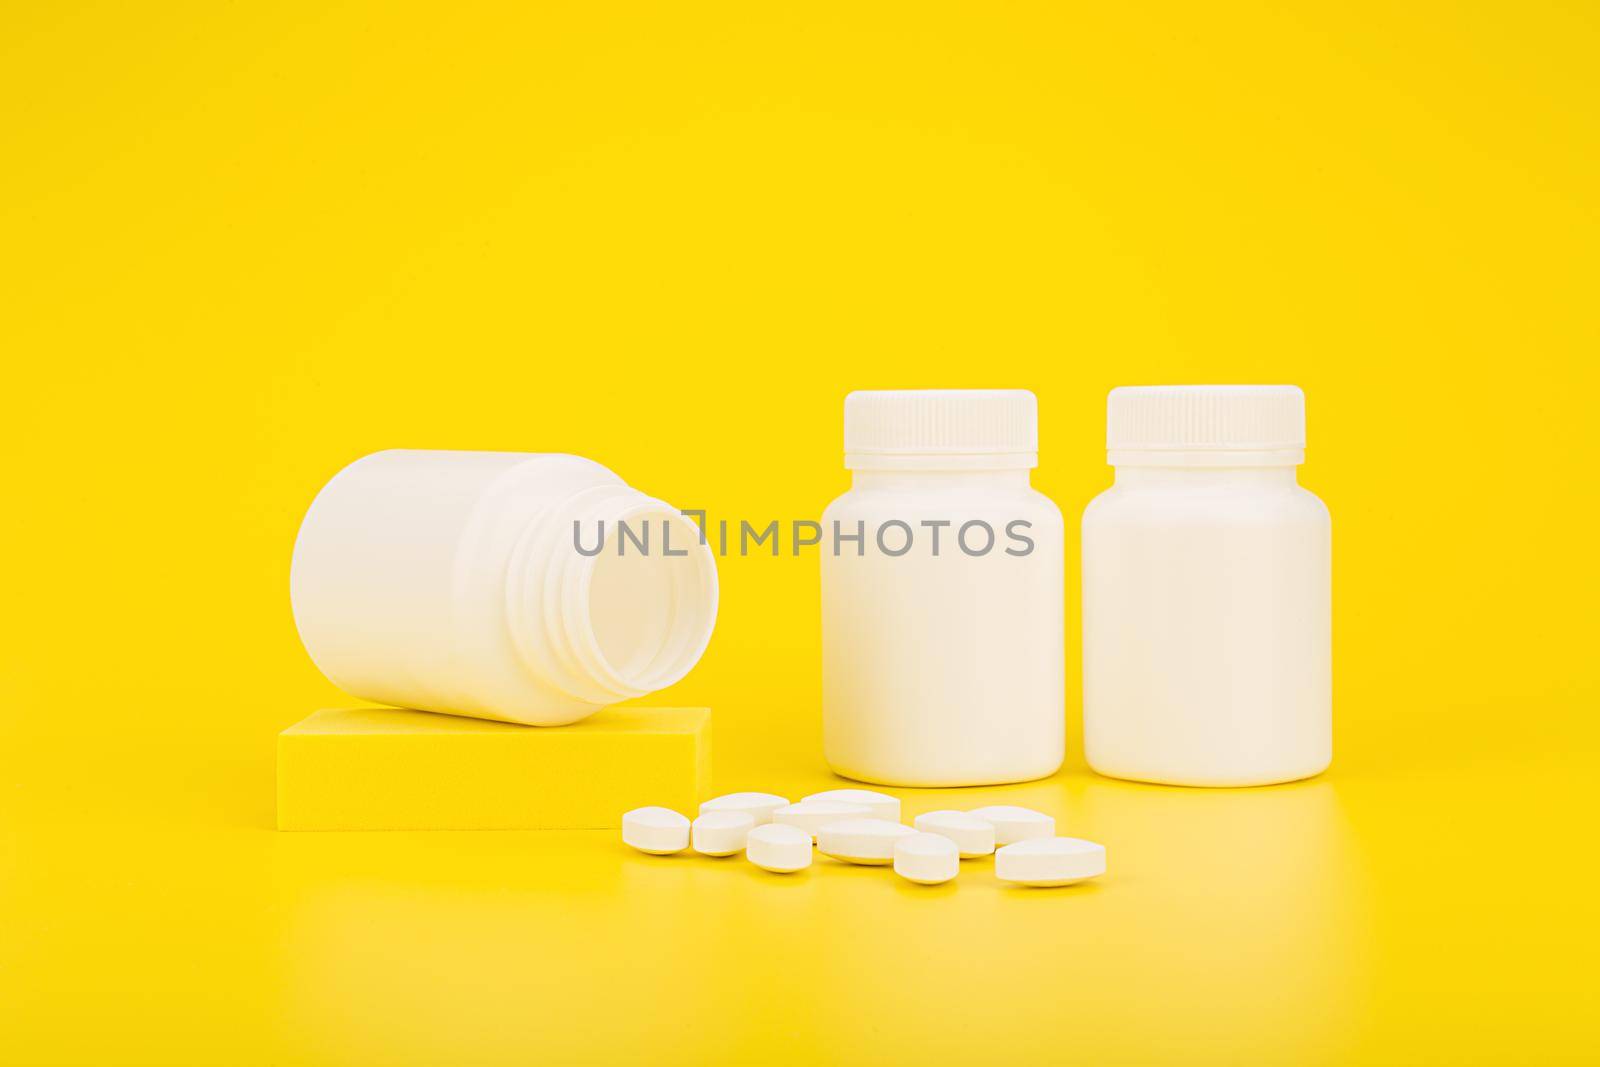 Bright till life with medication bottles and spilled pills on yellow background. The concept of pharmacy, health care and wellbeing or vitamins for kids